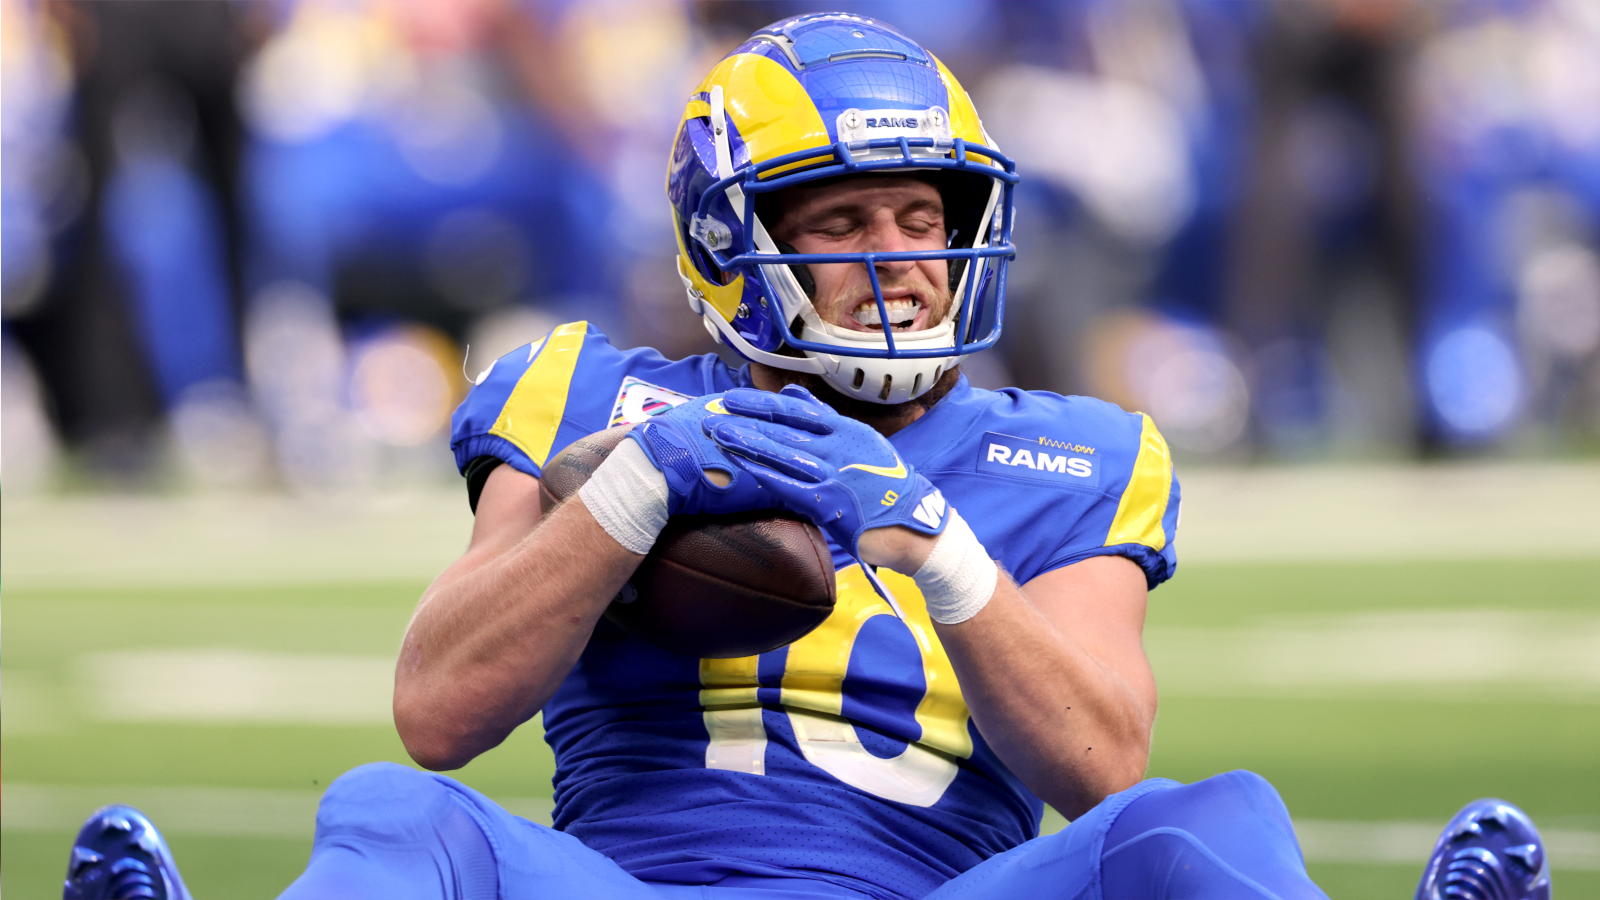 
                <strong>Die meisten Receiving Yards</strong><br>
                &#x2022; Cooper Kupp (Los Angeles Rams) mit<strong> 1.947 -</strong><br>&#x2022; Justin Jefferson (Minnesota Vikings) mit<strong> 1.616 -</strong><br>&#x2022; Davante Adams (Green Bay Packers) mit <strong>1.553 - </strong><br>Die komplette Statistik im Datencenter >> 
              